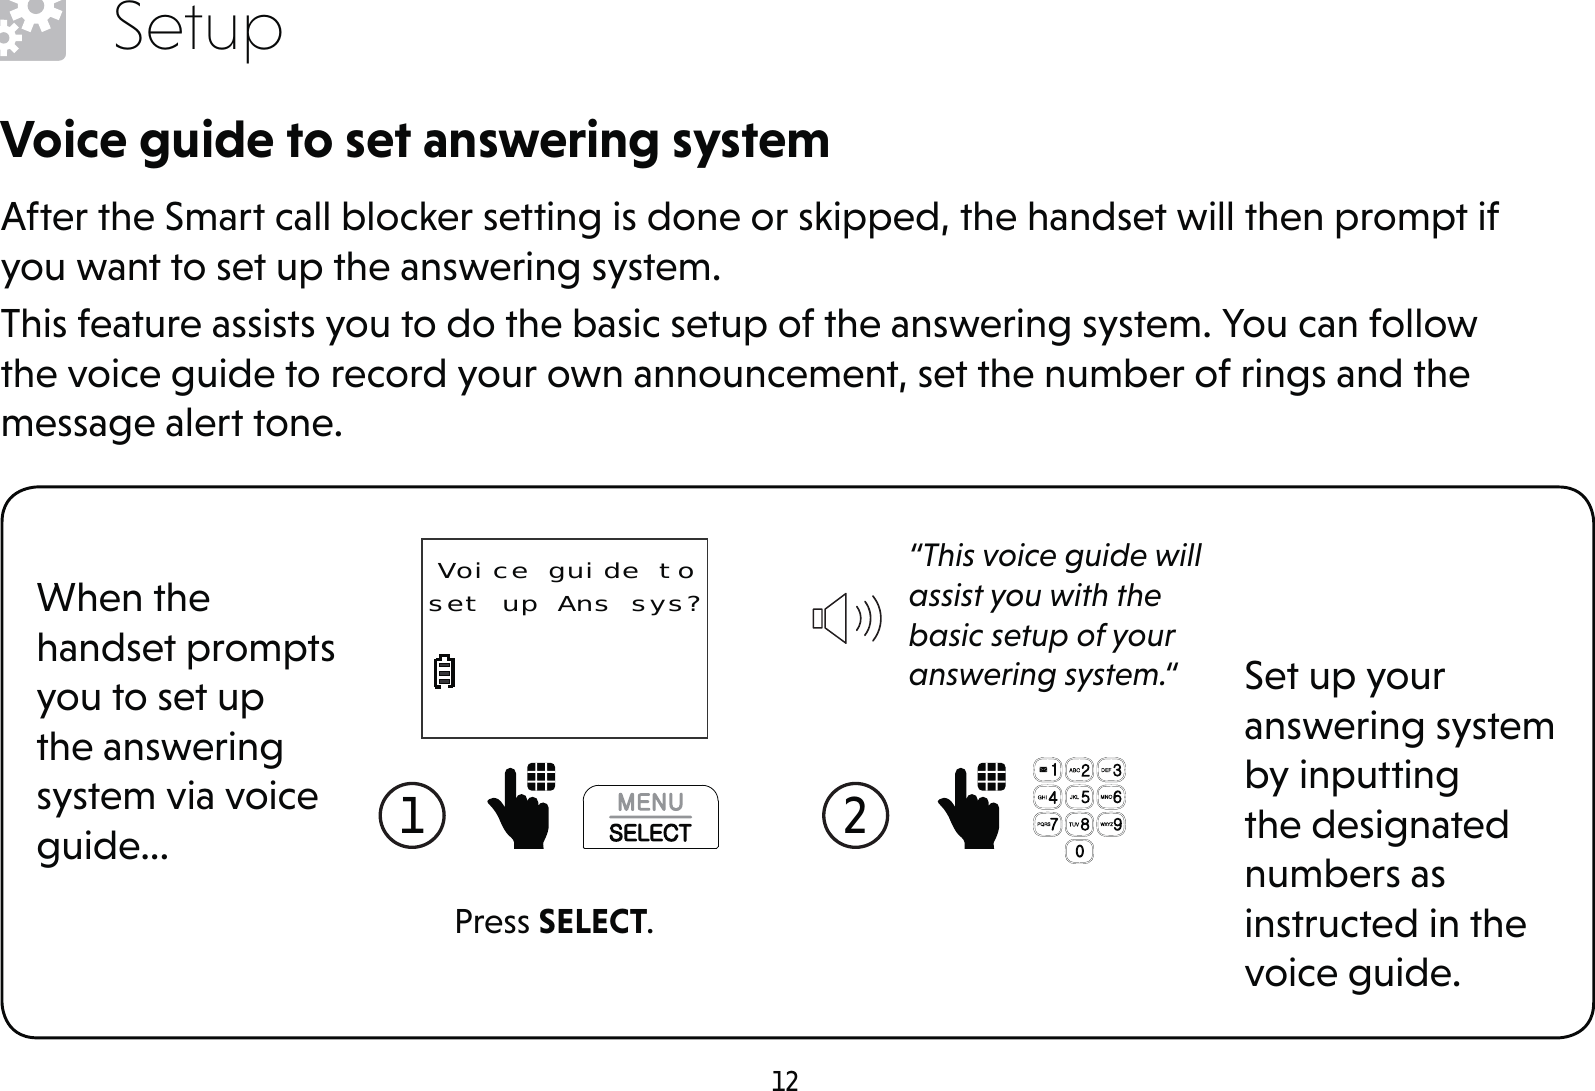 12SetupVoice guide to set answering systemAfter the Smart call blocker setting is done or skipped, the handset will then prompt if you want to set up the answering system.This feature assists you to do the basic setup of the answering system. You can follow the voice guide to record your own announcement, set the number of rings and the message alert tone.When the handset prompts you to set up the answering system via voice guide...Set up your answering system by inputting the designated numbers as instructed in the voice guide.1  2  Press SELECT.“This voice guide will assist you with the basic setup of your answering system.“Voice guide to set up Ans sys?